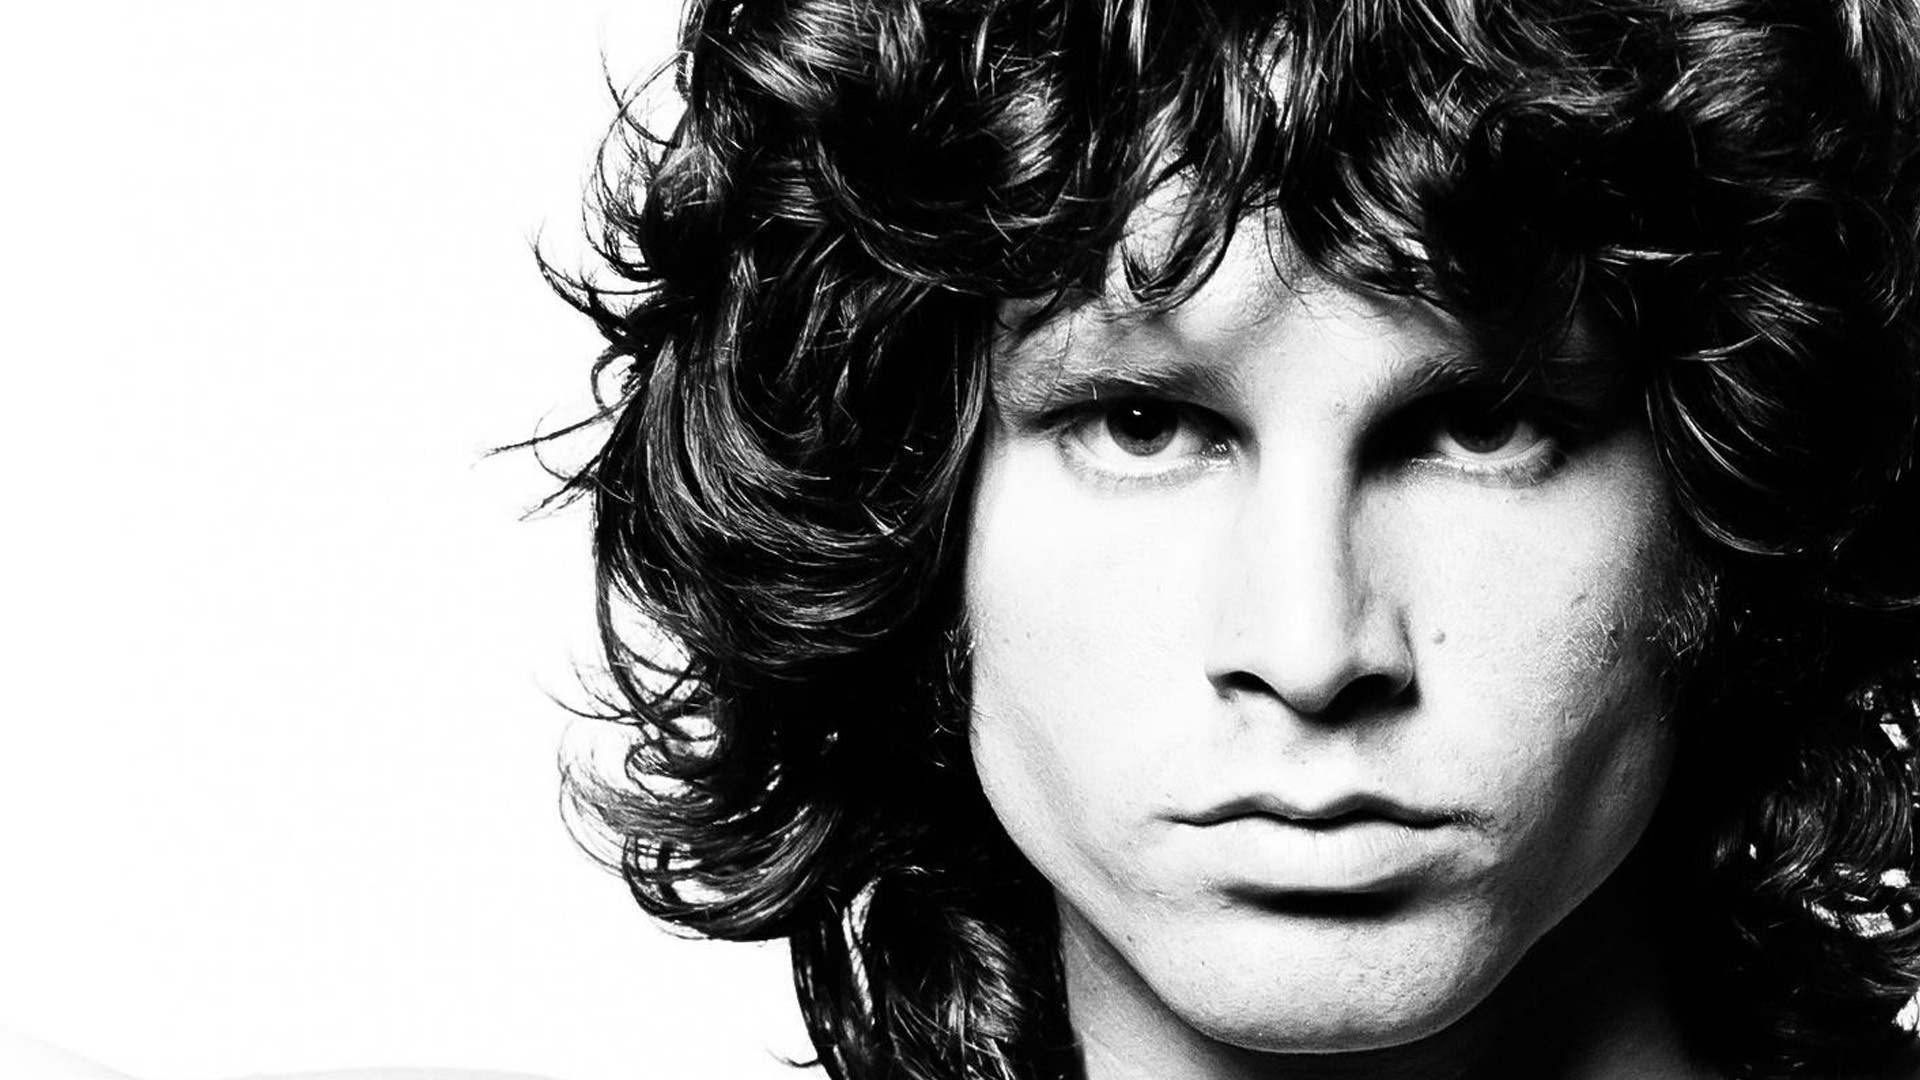 1920x1080 ... 2 Jim Morrison HD Wallpapers | Backgrounds - Wallpaper Abyss ...